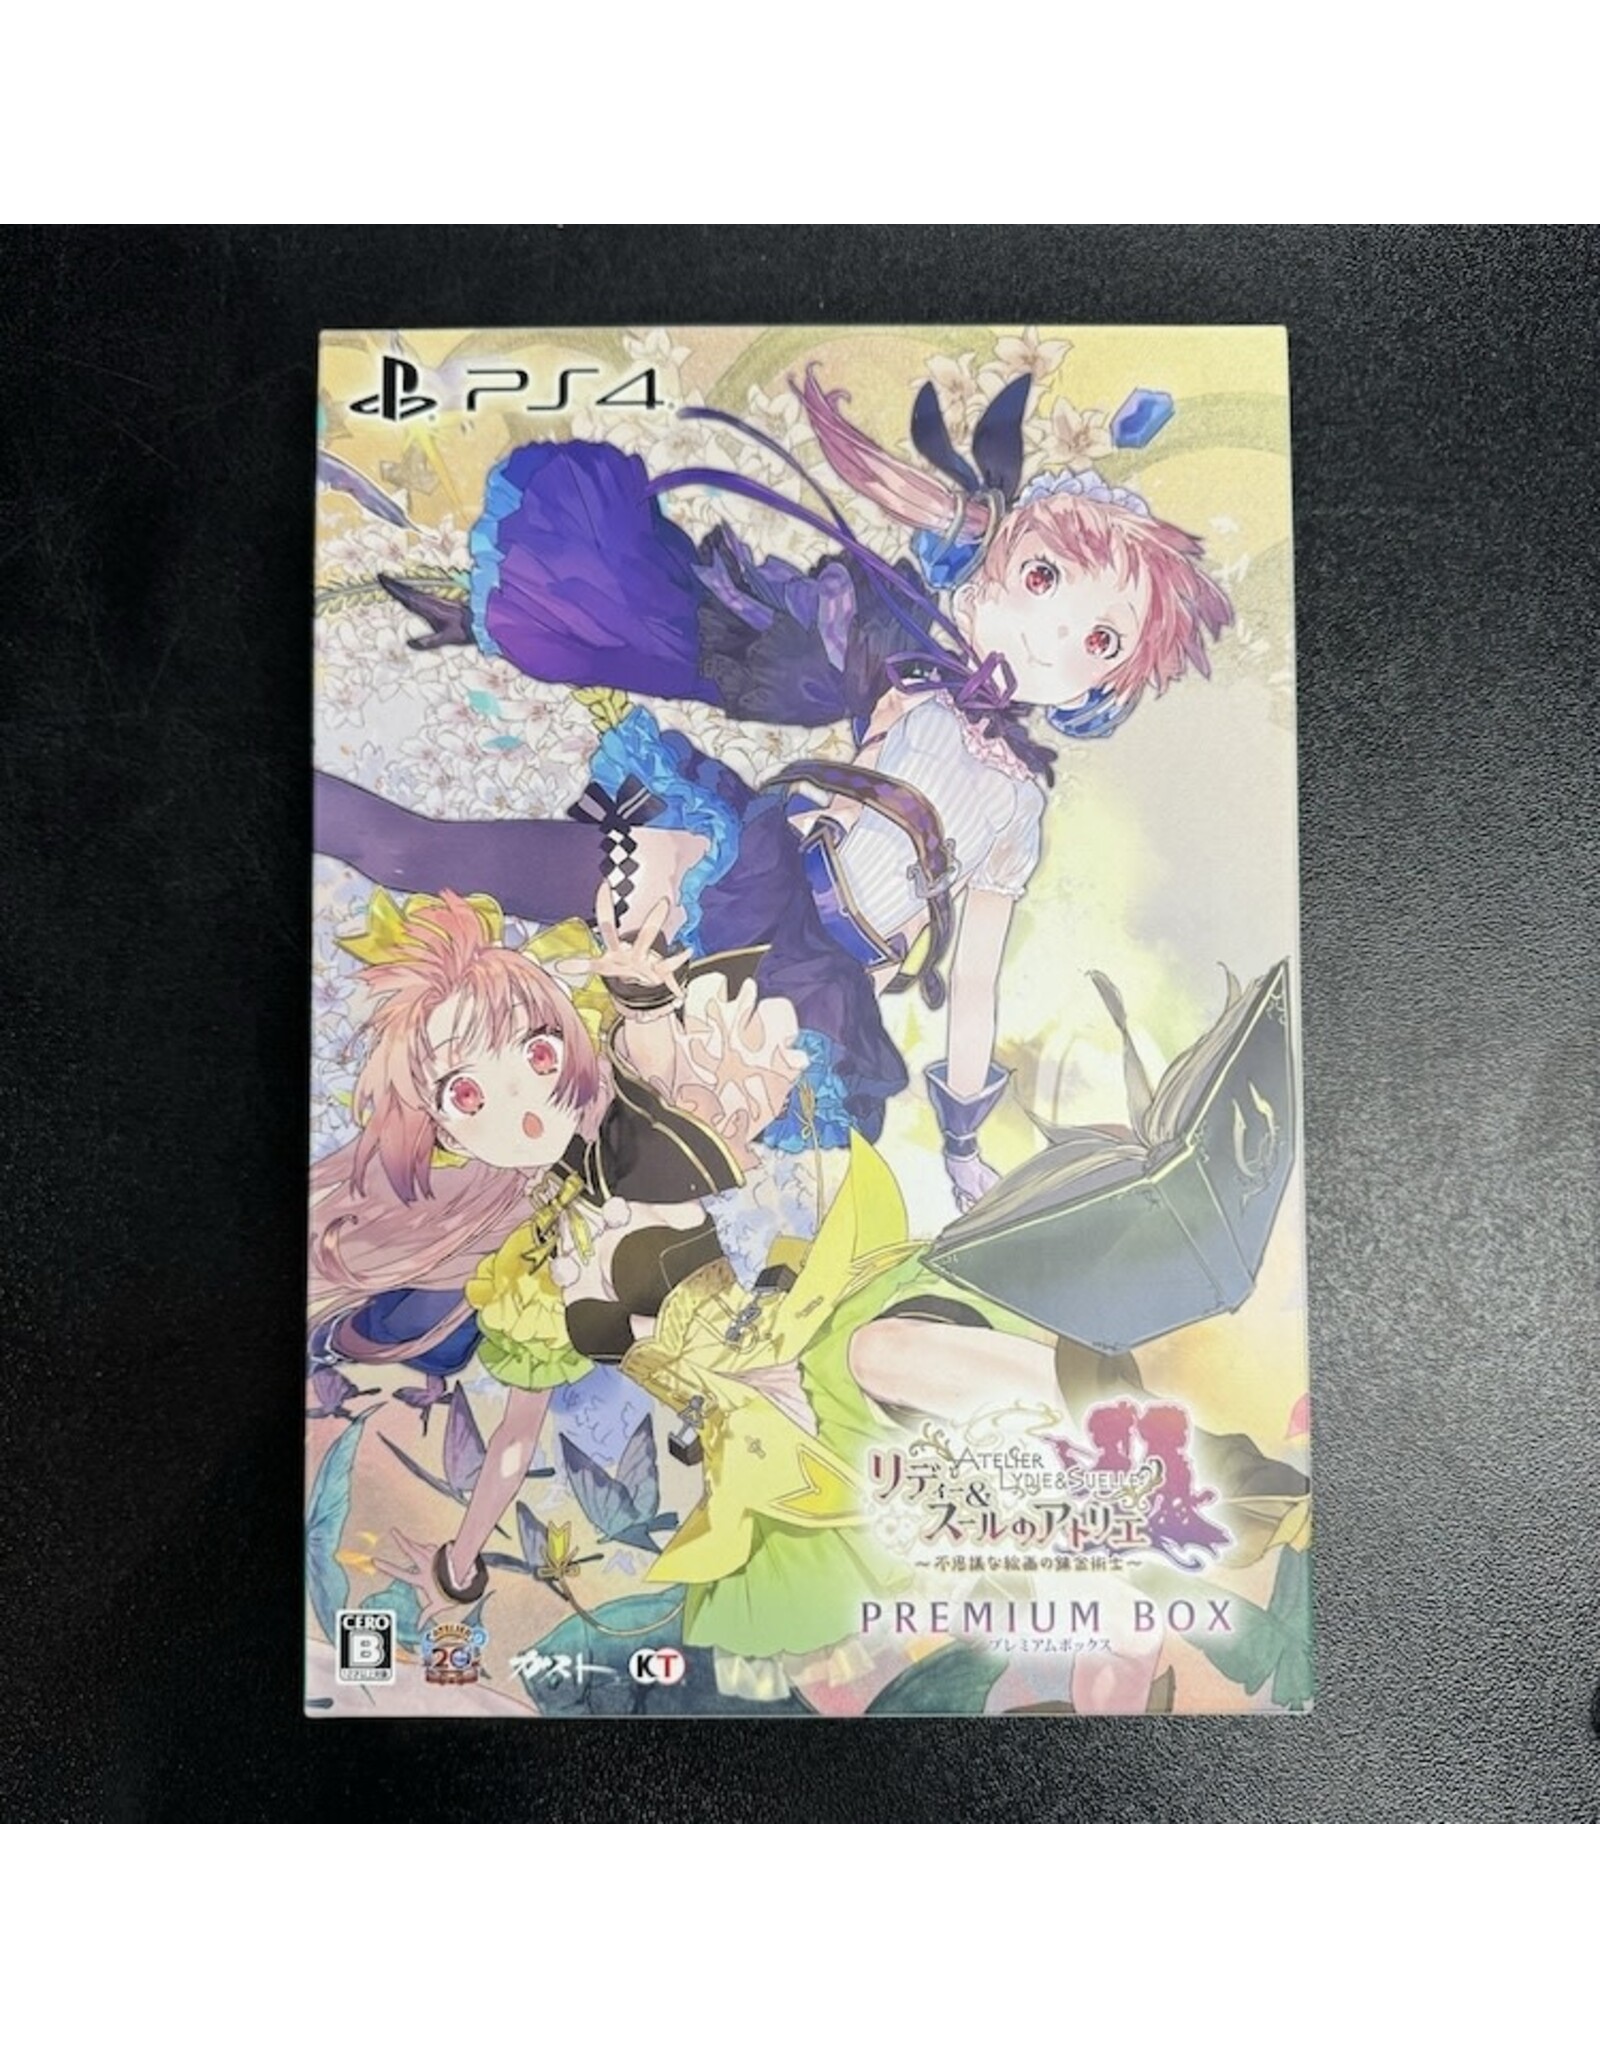 Playstation 4 Atelier Lydie & Suelle The Alchemists and the Mysterious Paintings Premium Box (CiB, JP Import)